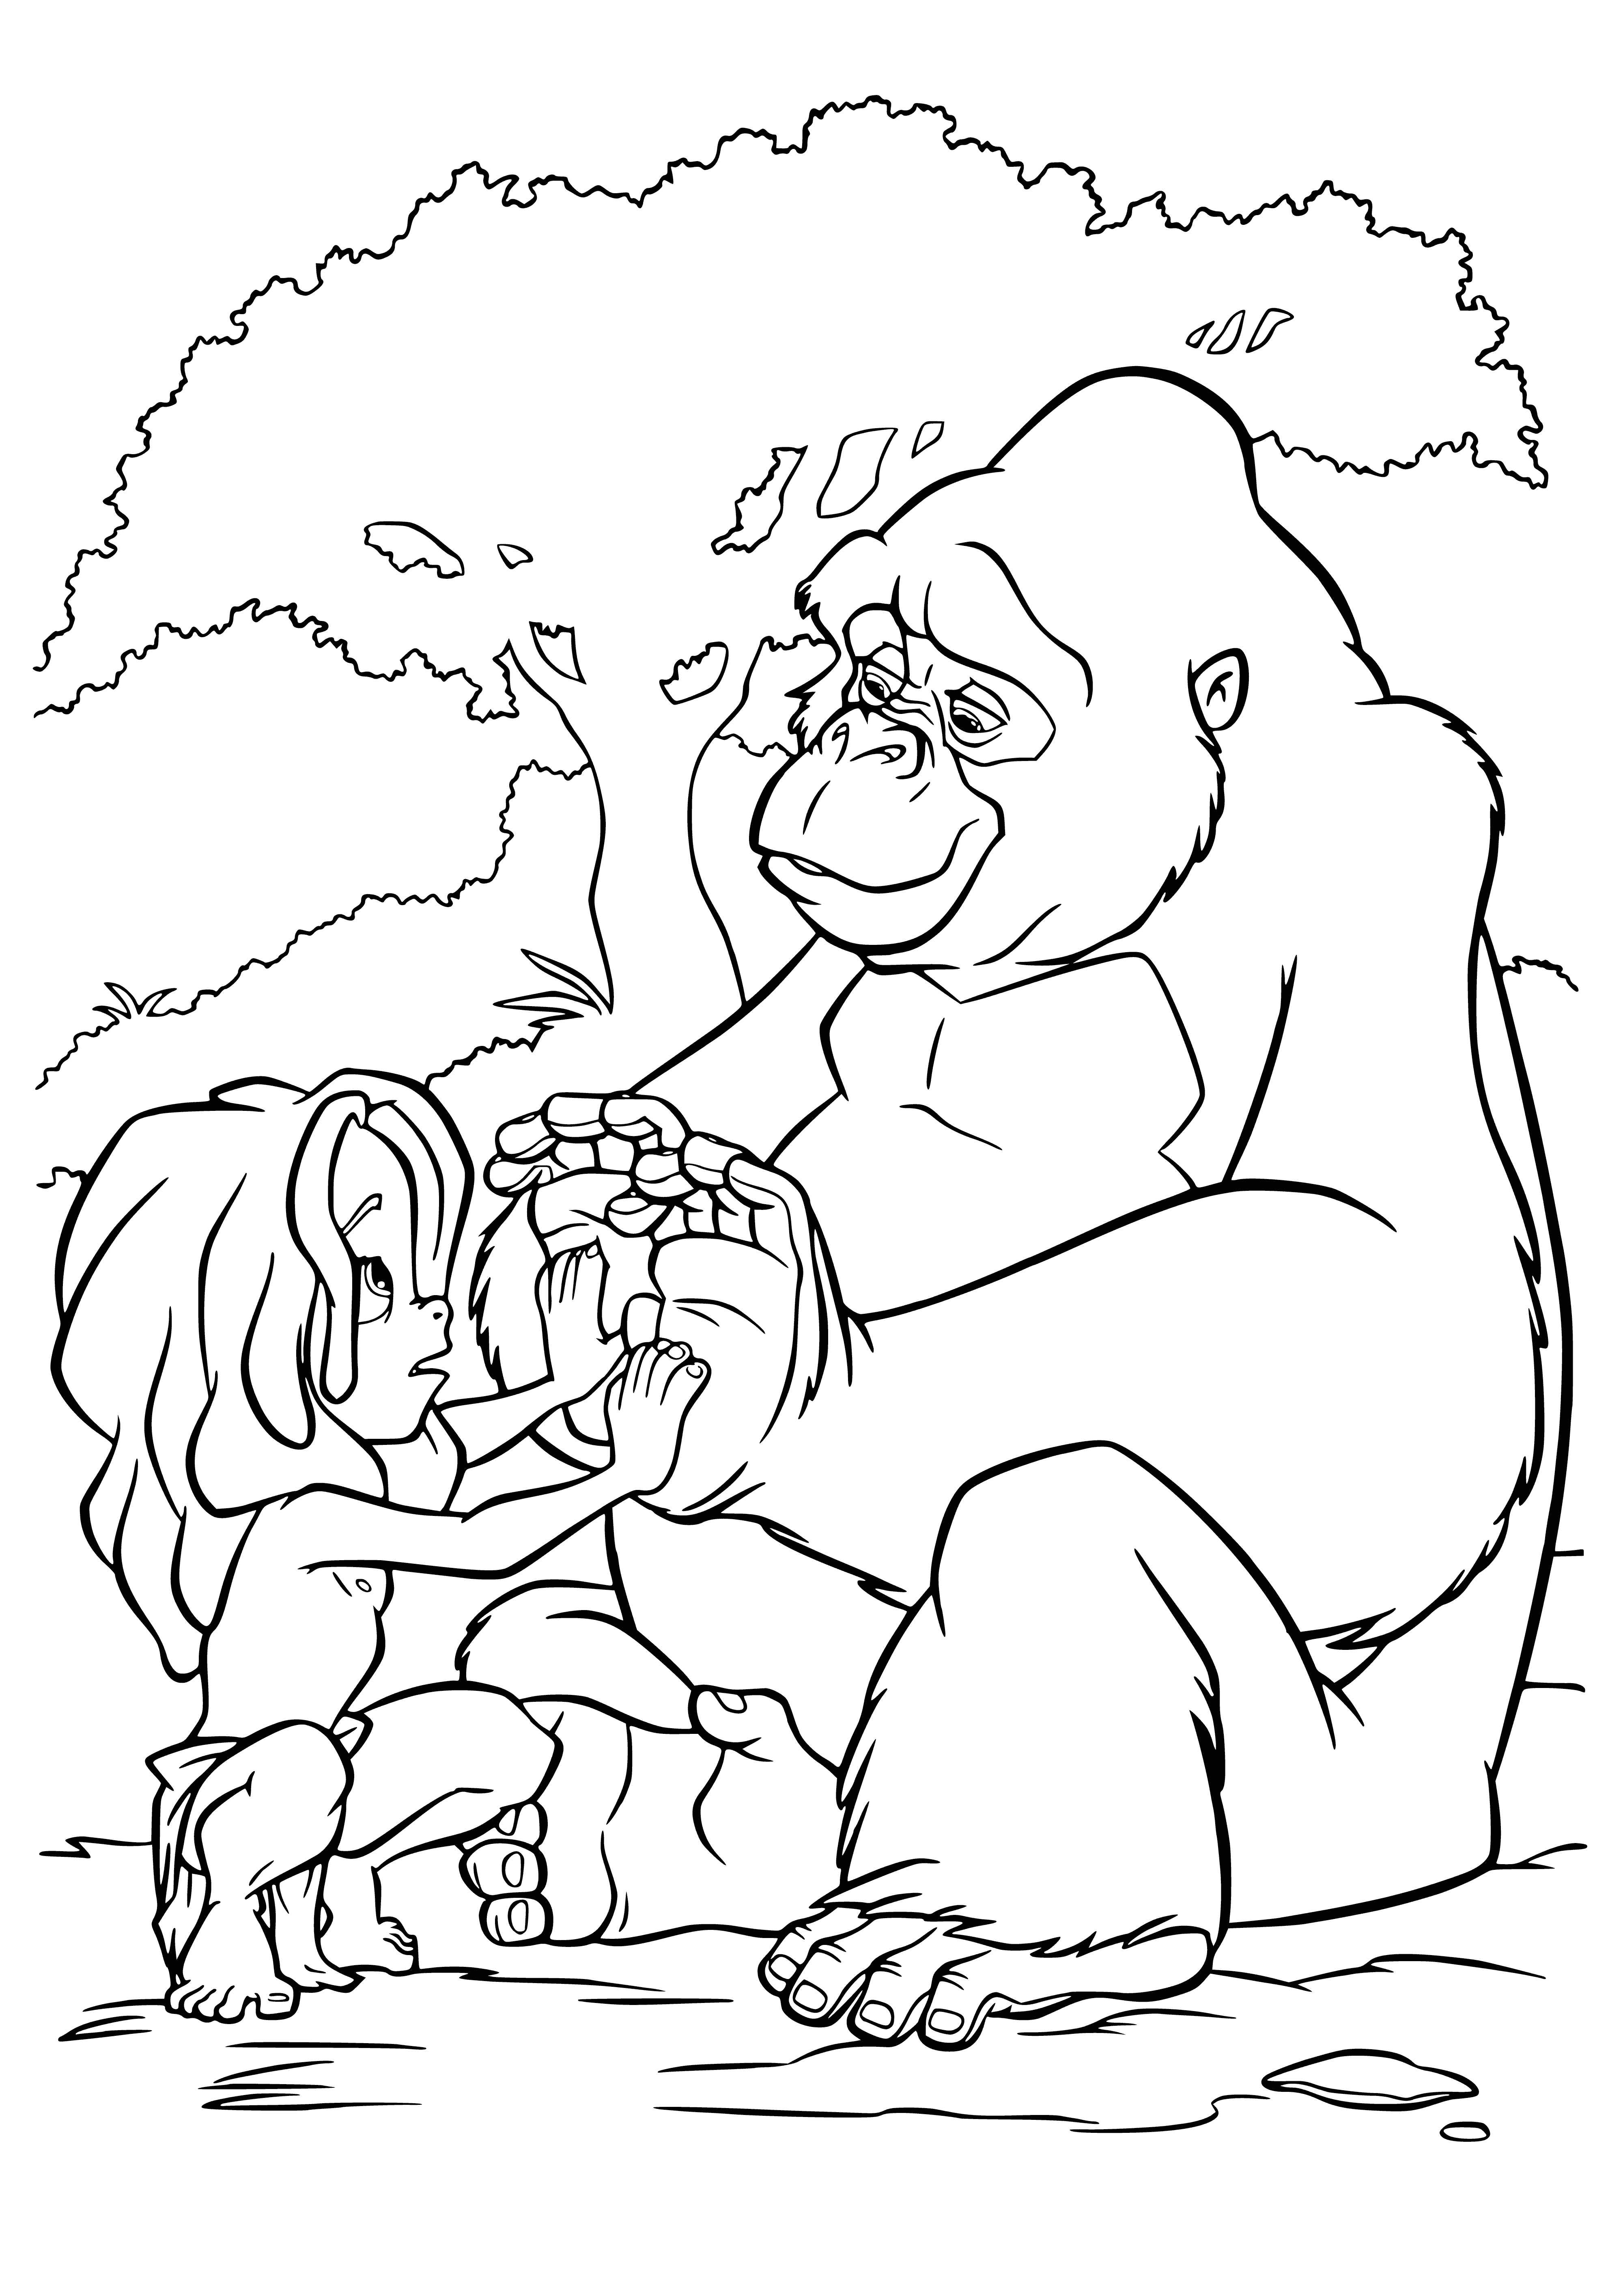 coloring page: A large, shirtless man is holding onto a rope around a small woman's waist, both looking in opposite directions.